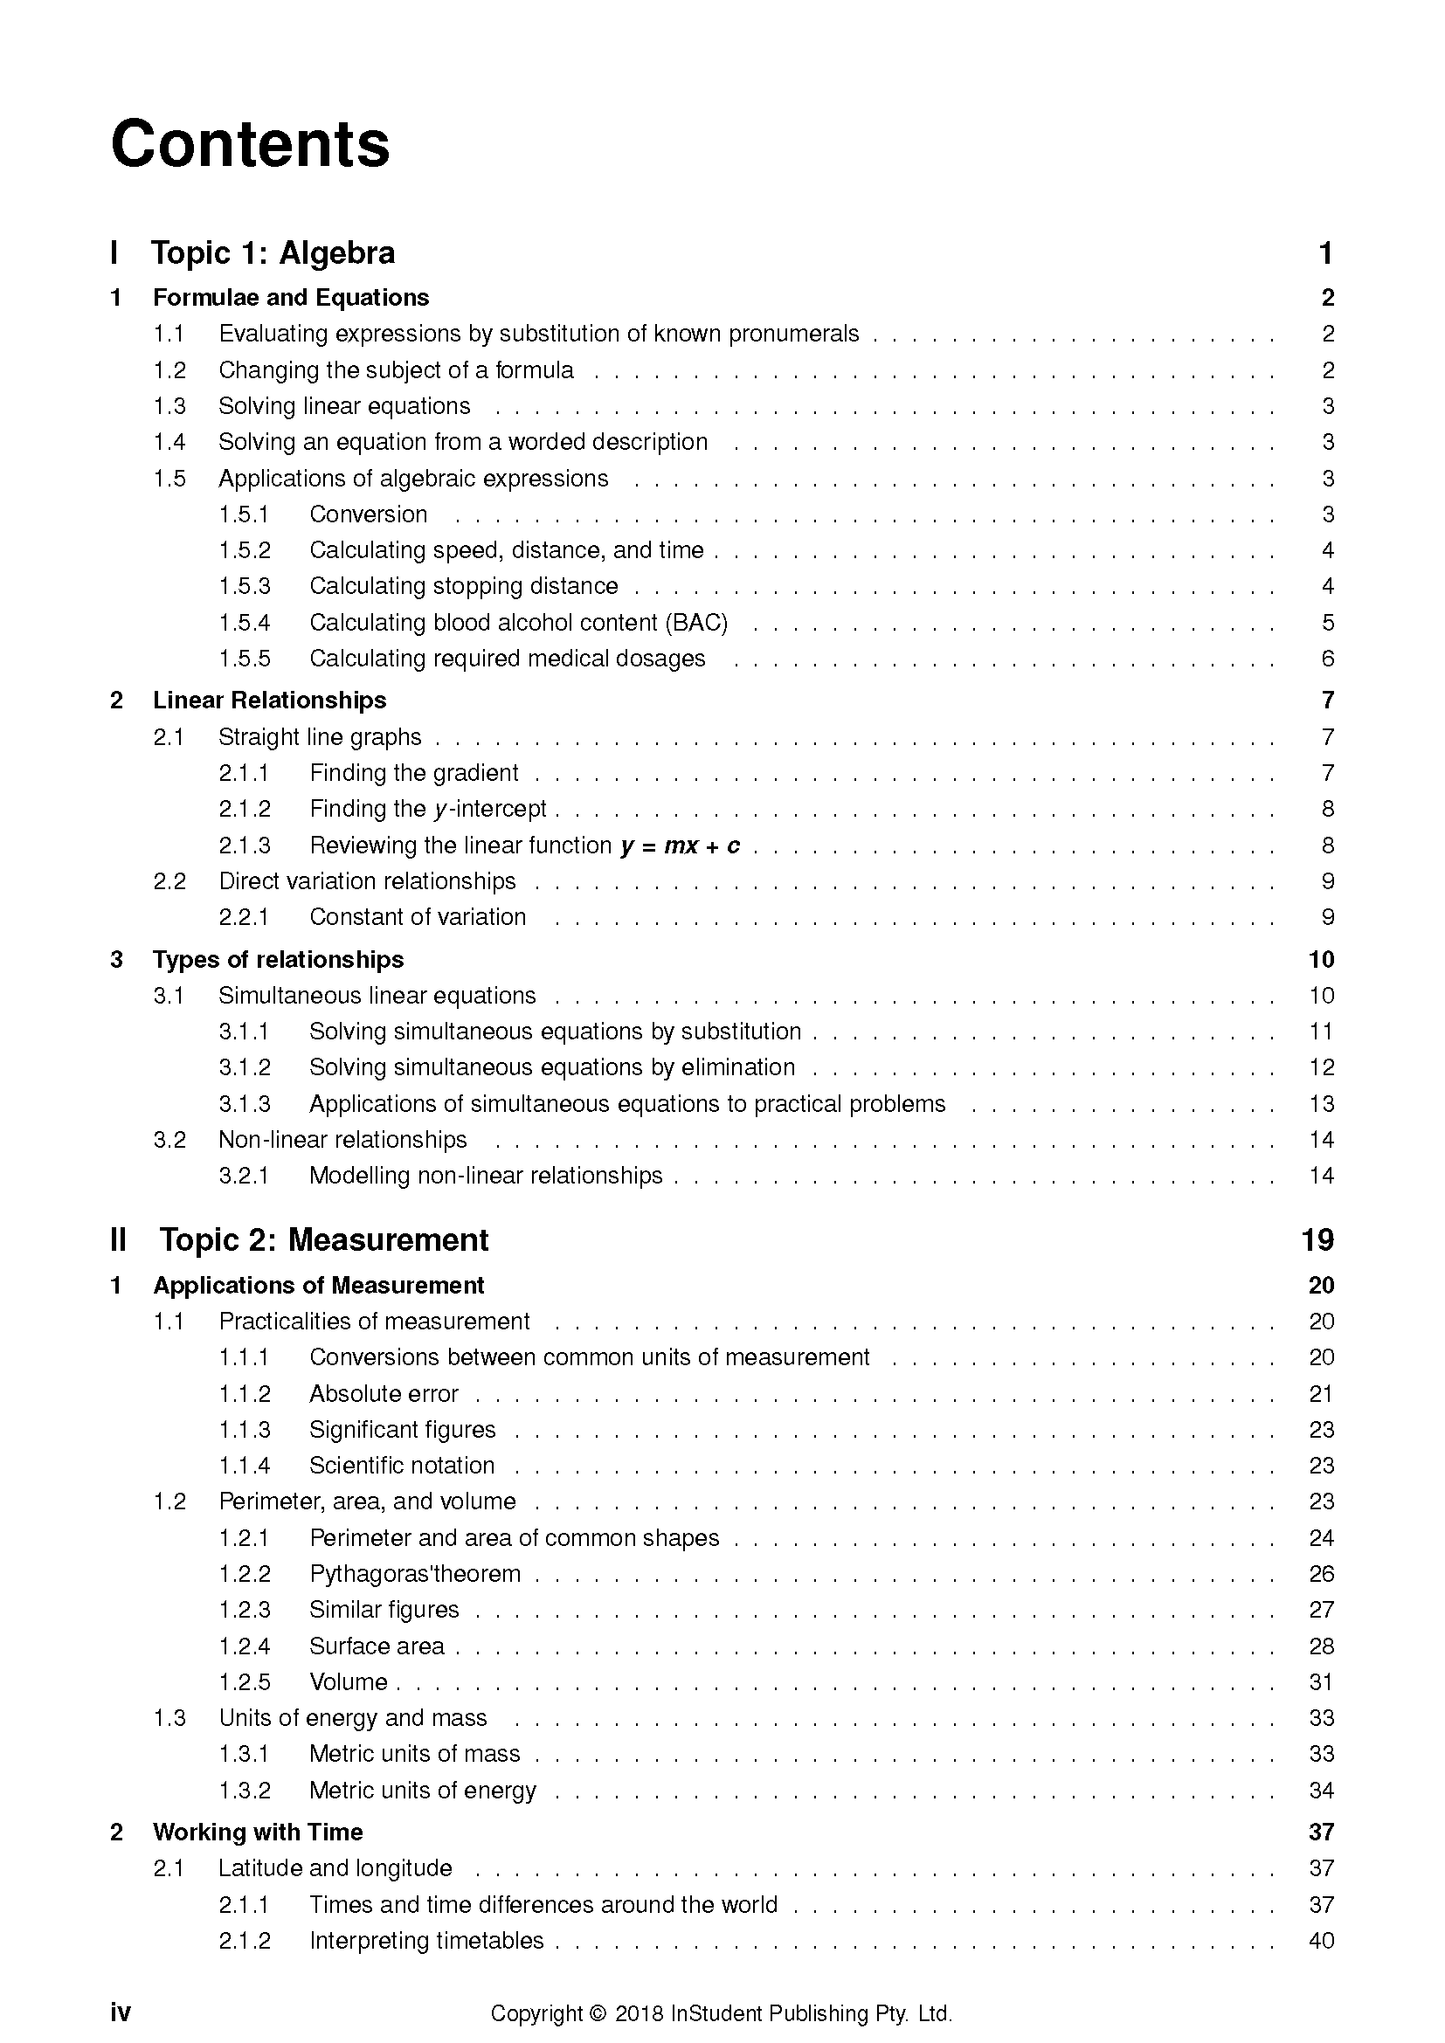 ATAR Notes HSC Year 12 Mathematics Standard 2 Complete Course Notes